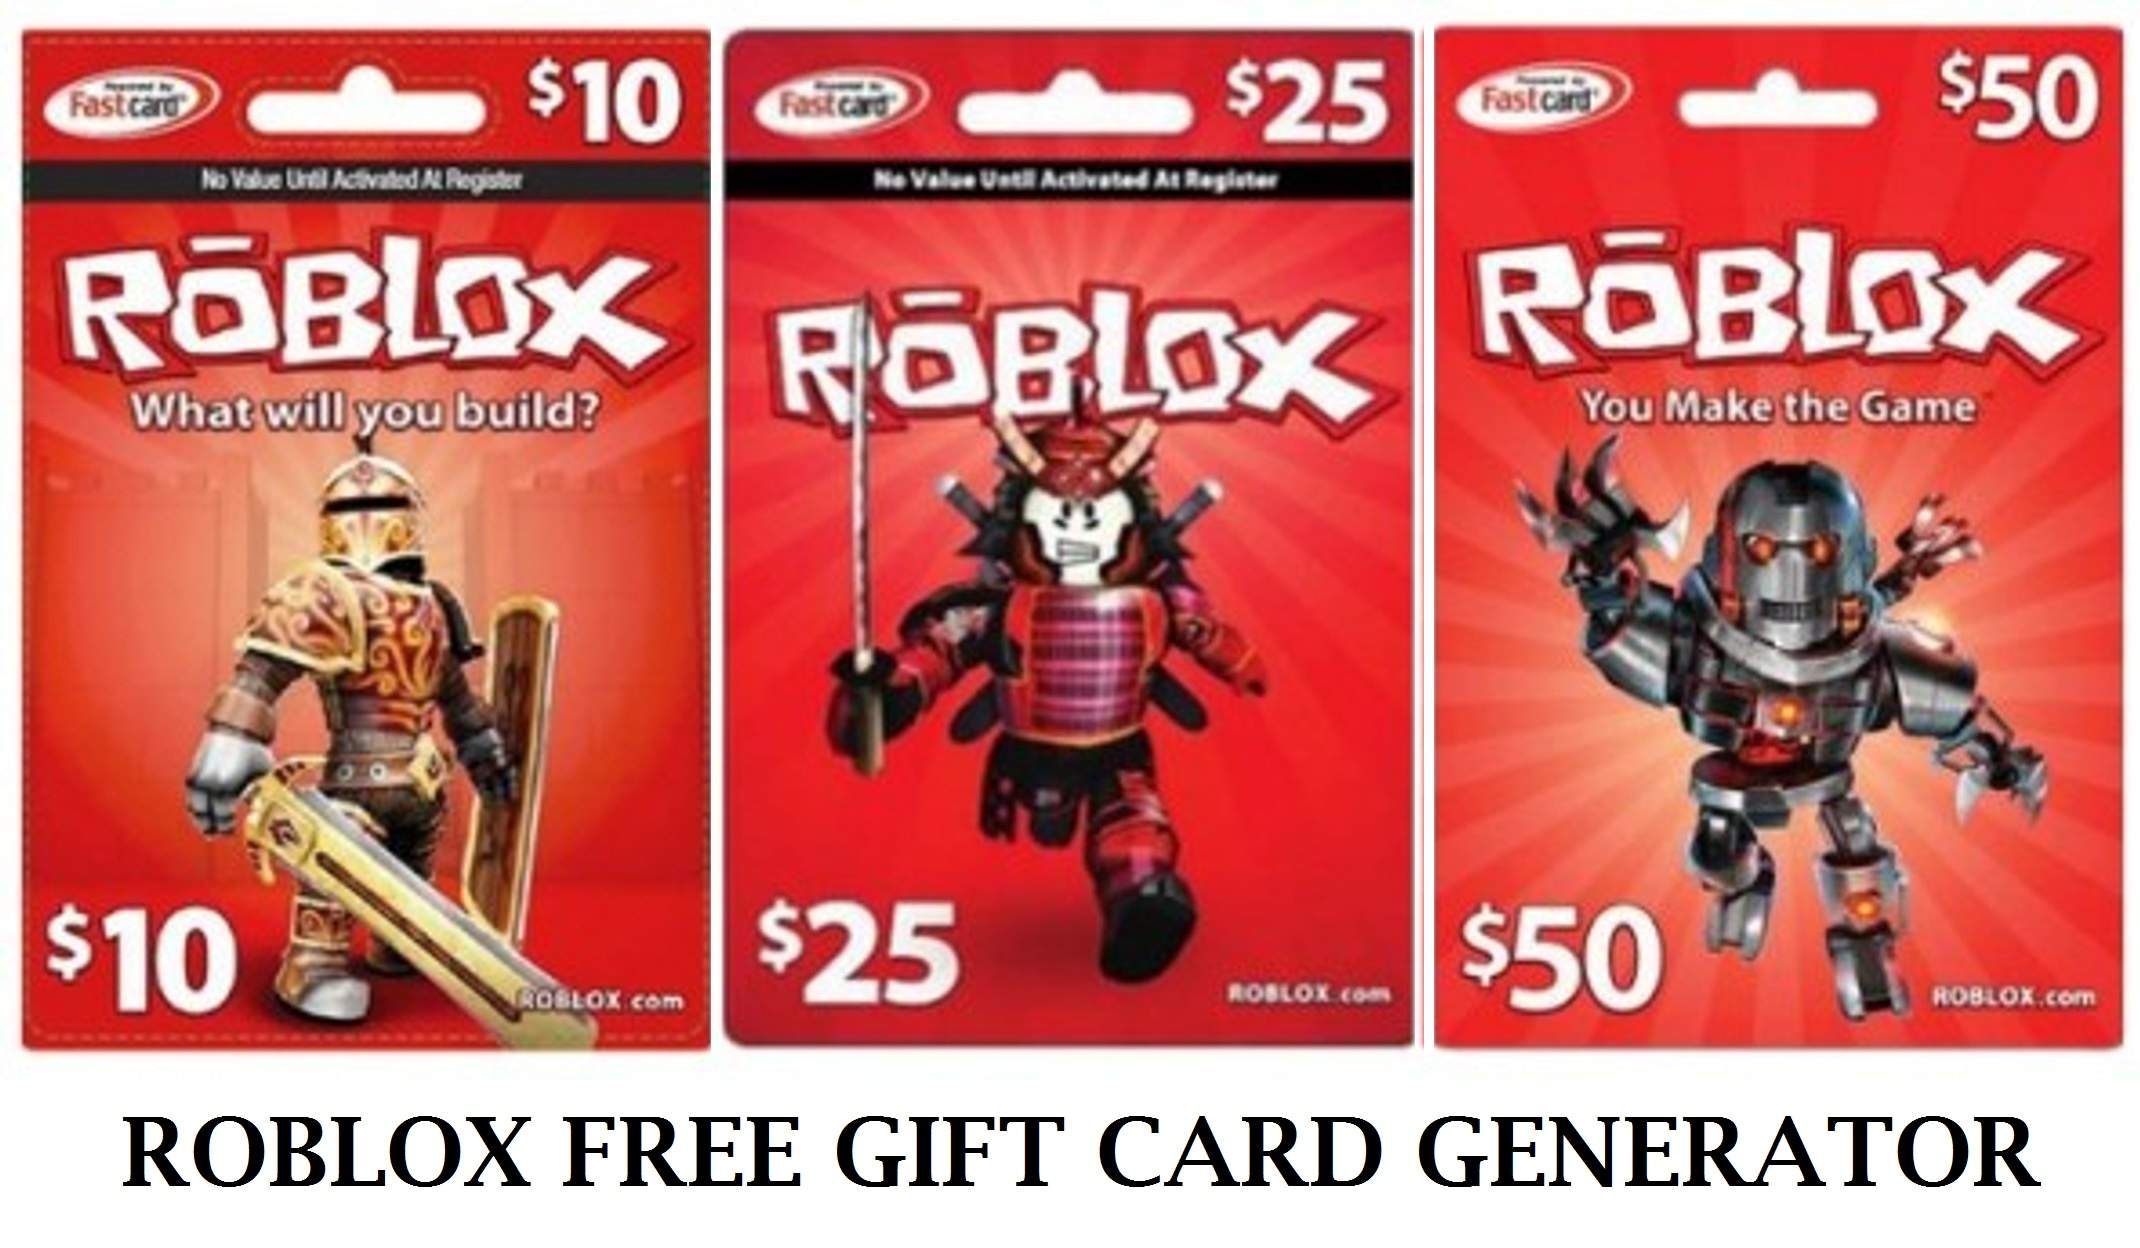 Roblox Free Gift Card Codes Generator Without Human Verification Buyfreeecoupons - goku vs broly suit ripped roblox free robux gift card codes giveaway live free